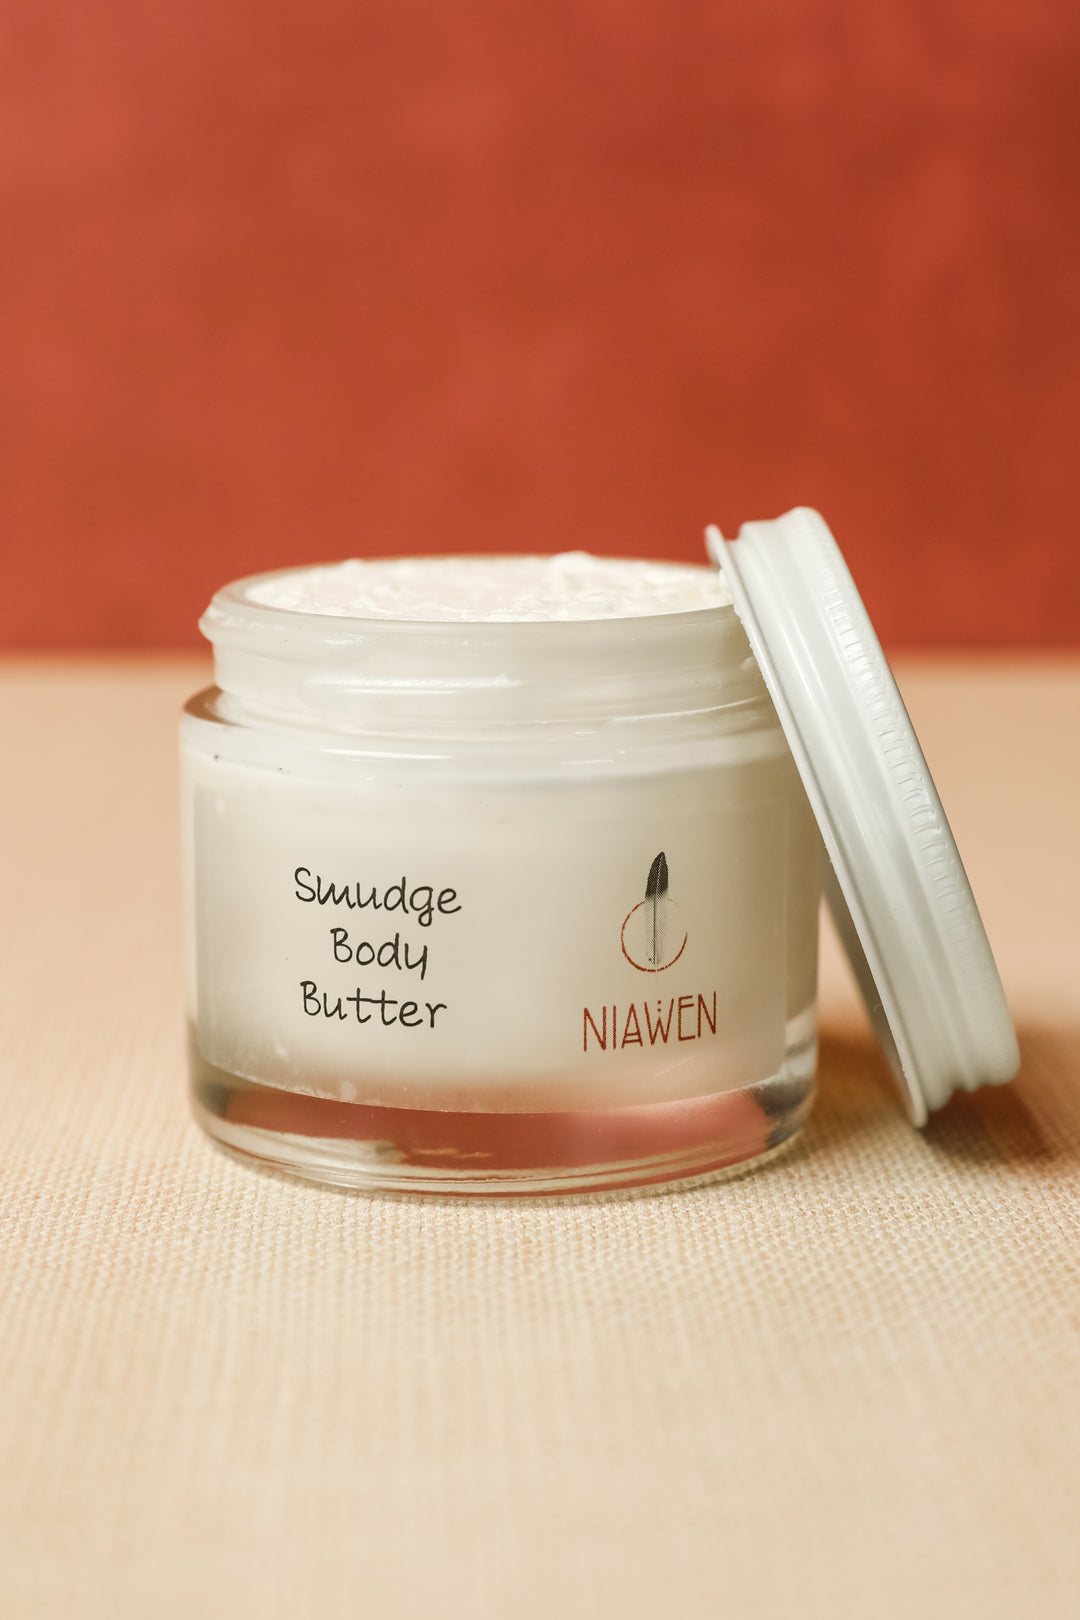 Smudge Body Butter